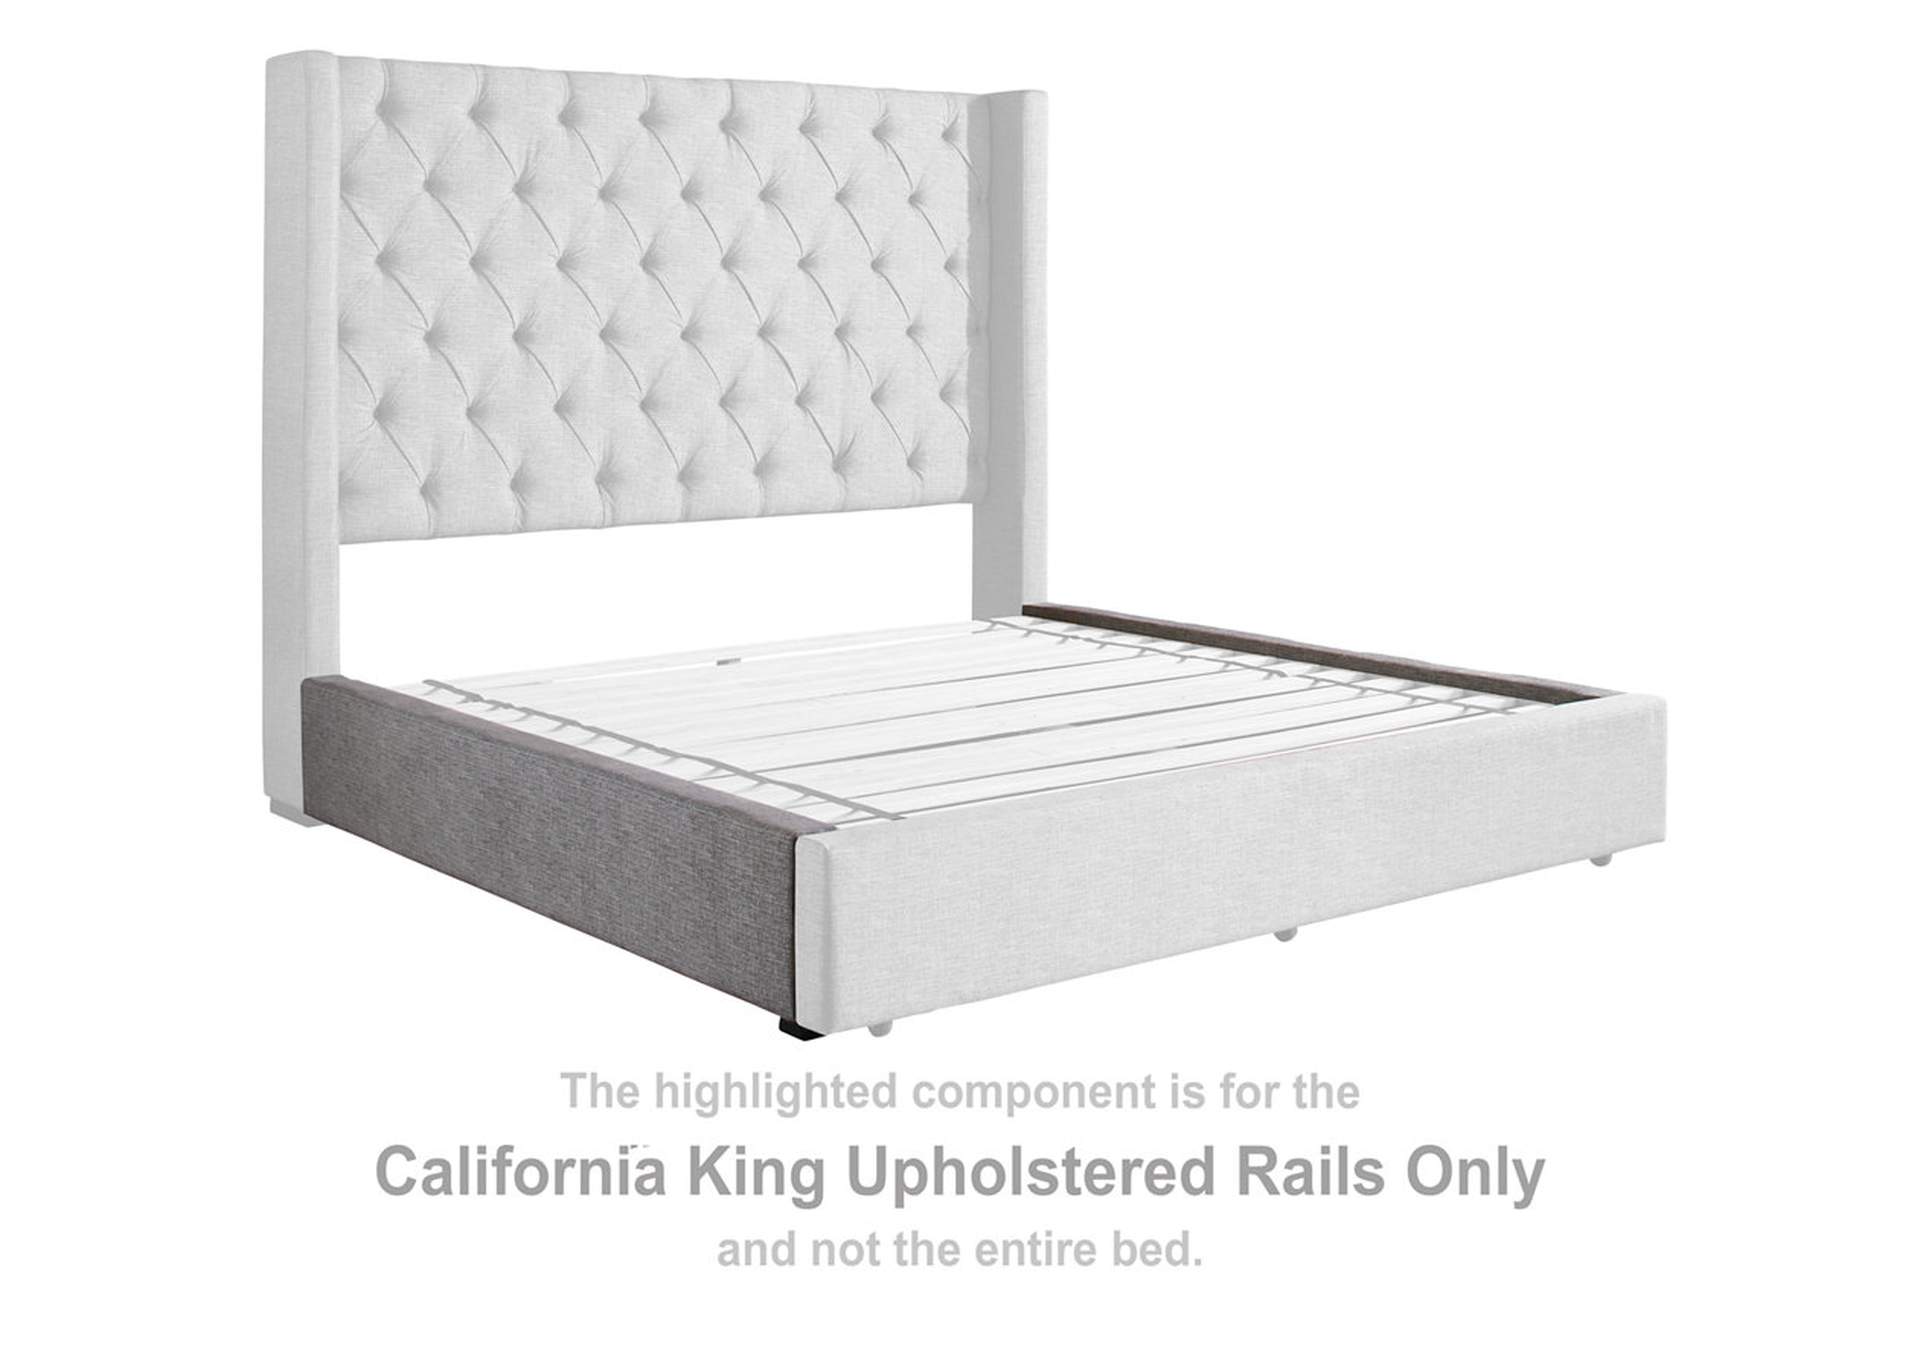 Sorinella California King Upholstered Bed with 1 Large Storage Drawer,Ashley